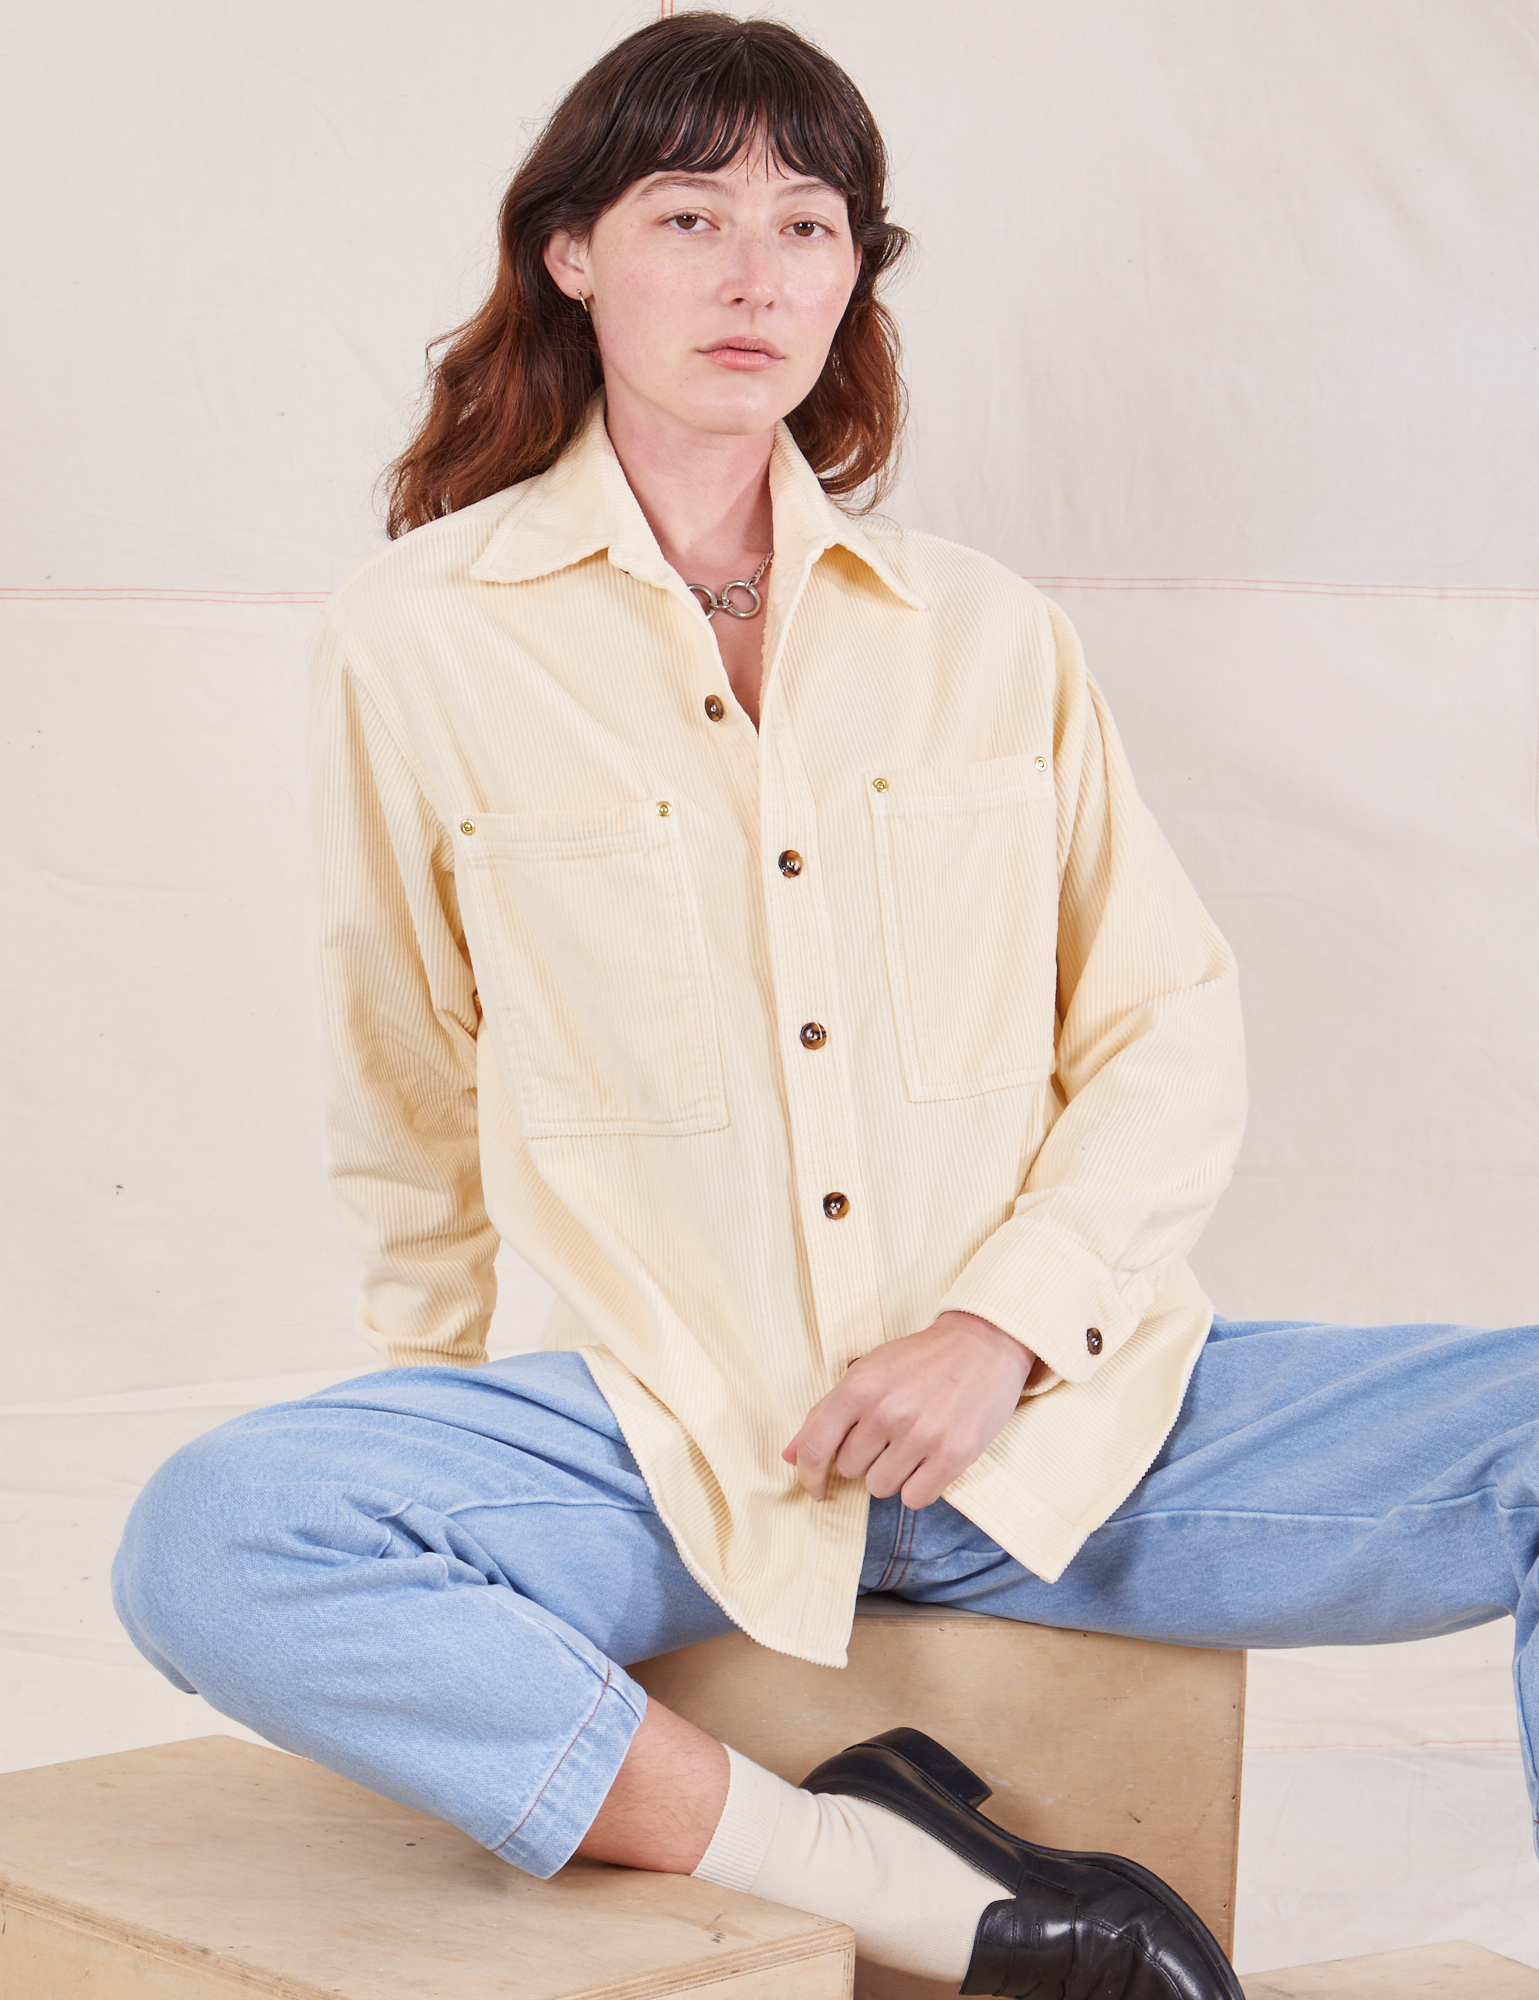 Alex is wearing a buttoned up Corduroy Overshirt in Vintage Off-White and light wash Denim Trouser Jeans